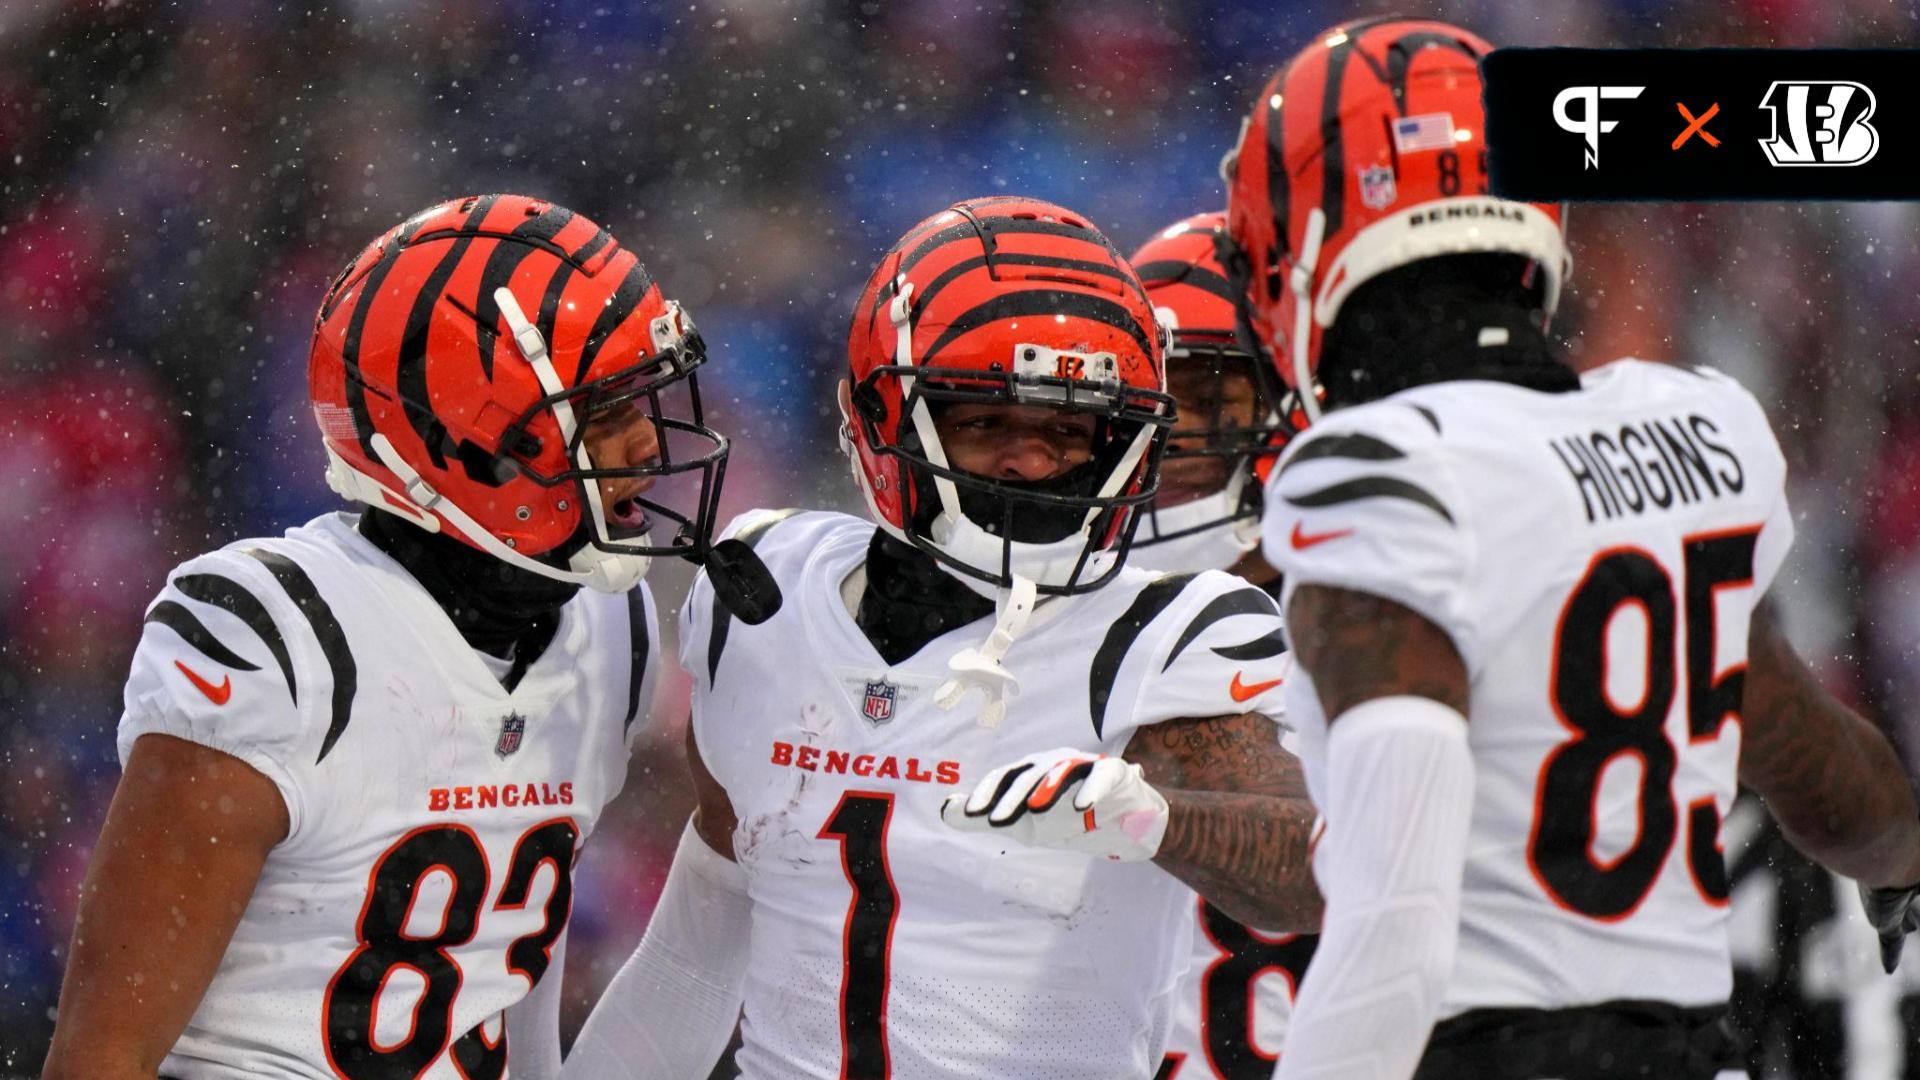 Cincinnati Bengals wide receiver Ja'Marr Chase (1), center, is congratulated by Cincinnati Bengals wide receiver Tyler Boyd (83), Cincinnati Bengals running back Joe Mixon (28) and Cincinnati Bengals wide receiver Tee Higgins (85) after a touchdown catch in the first quarter during an NFL divisional playoff football game between the Cincinnati Bengals and the Buffalo Bills, Sunday, Jan. 22, 2023, at Highmark Stadium in Orchard Park, N.Y. Cincinnati Bengals At Buffalo Bills Afc Divisional Jan 22 0190